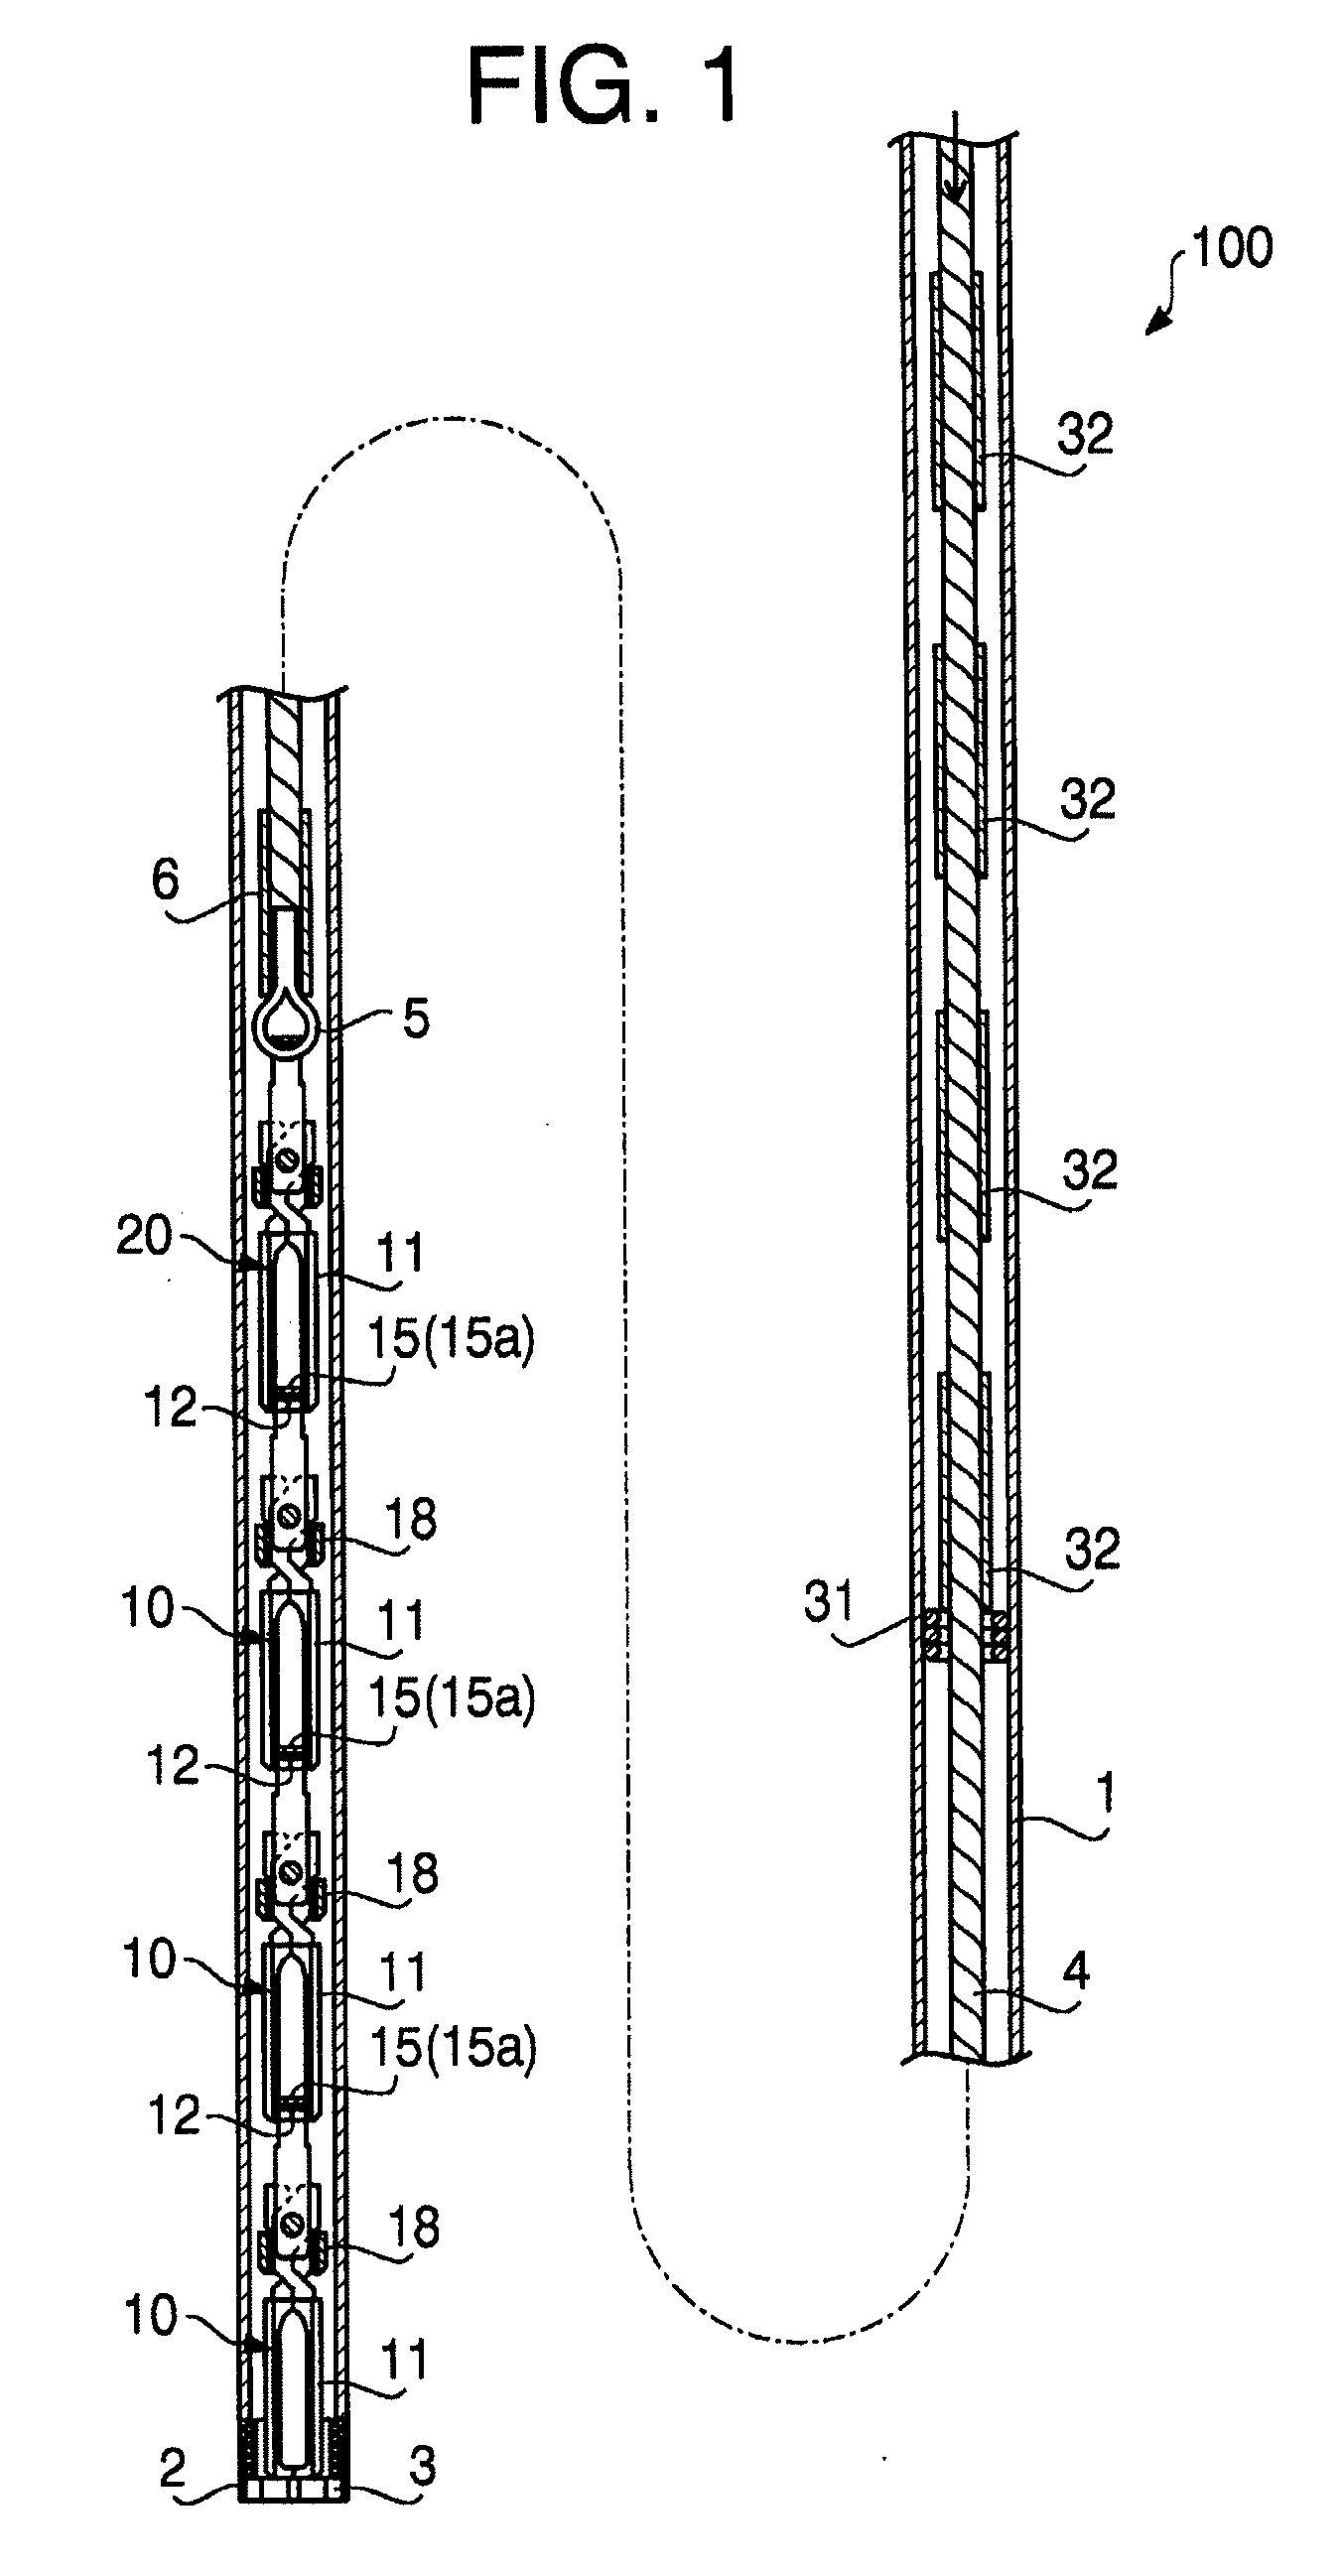 Clipping instrument for an endoscopic surgical device